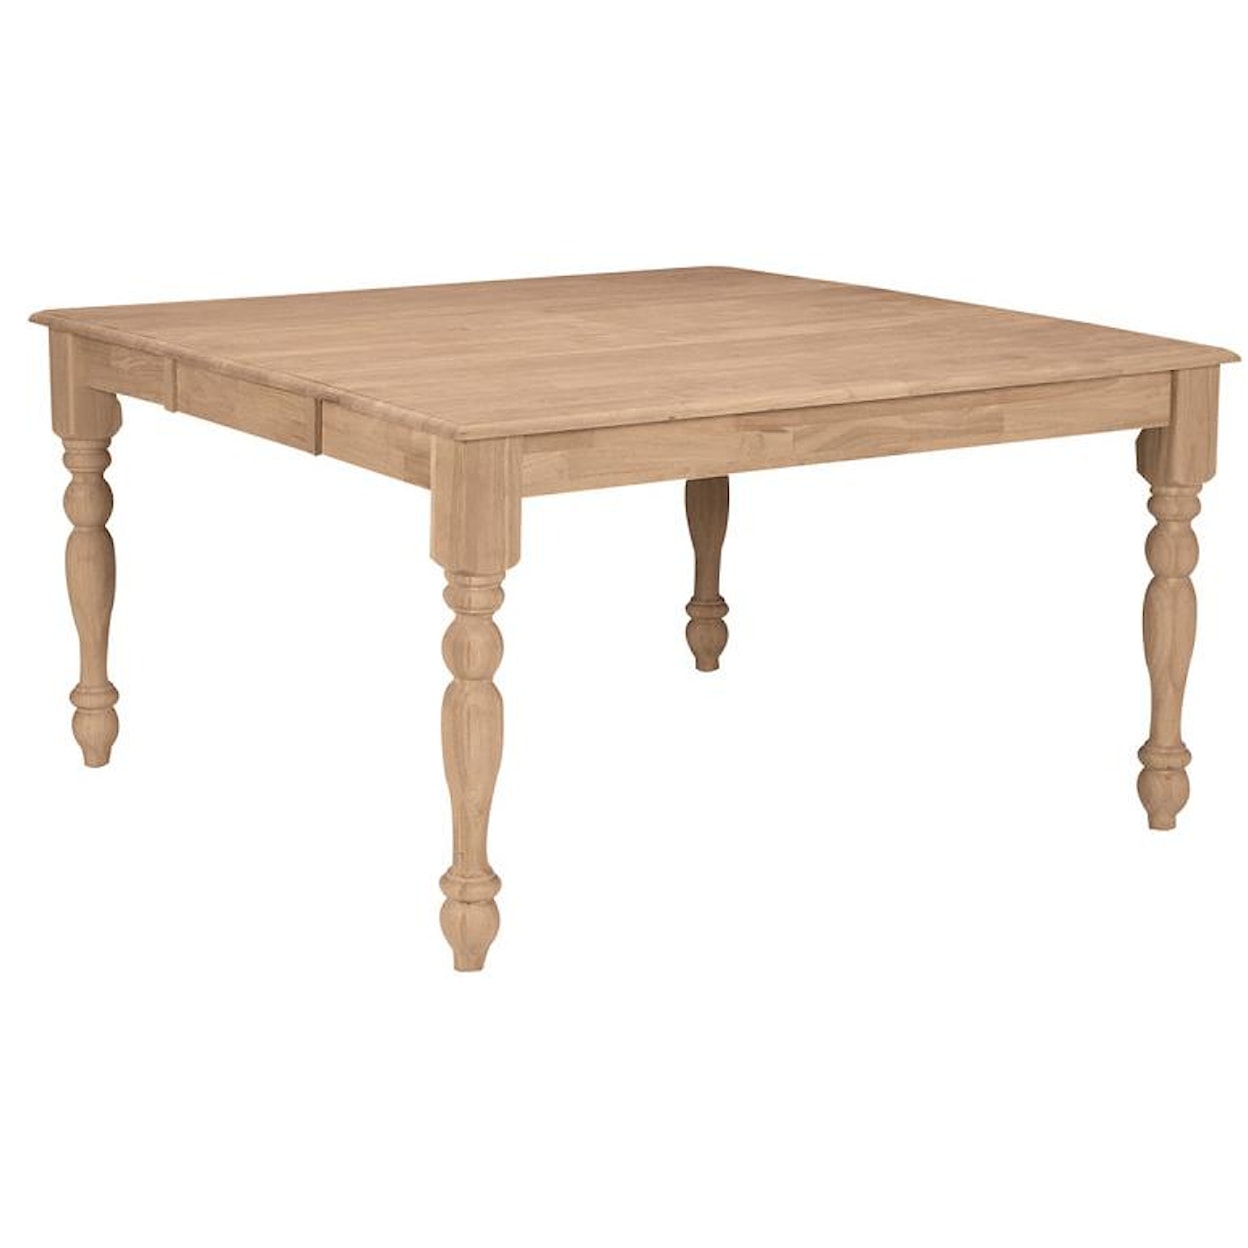 John Thomas SELECT Dining Room Square Butterfly Leaf Table with Turned Legs